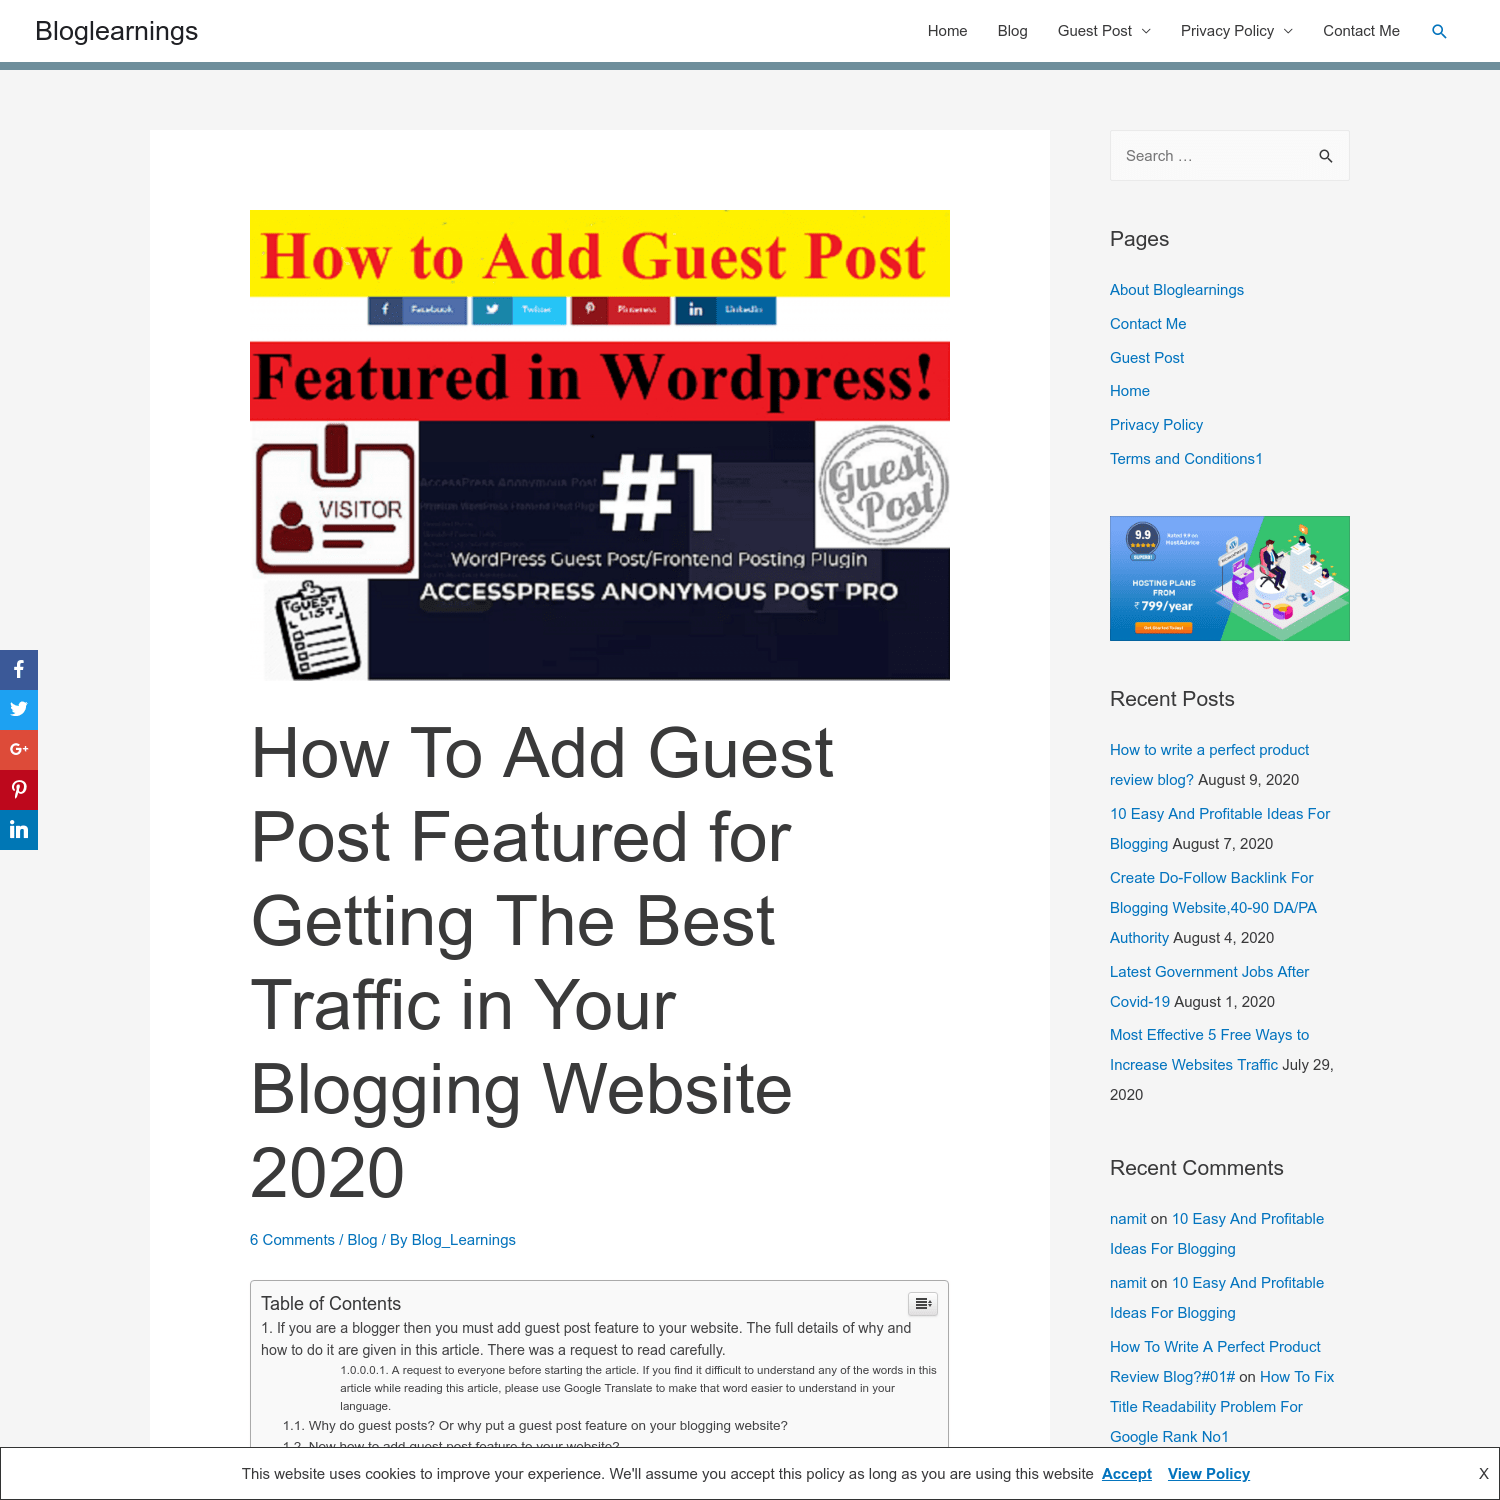 How To Add Guest Post Featured For Getting The Best Traffic In Your Blogging Website 2020